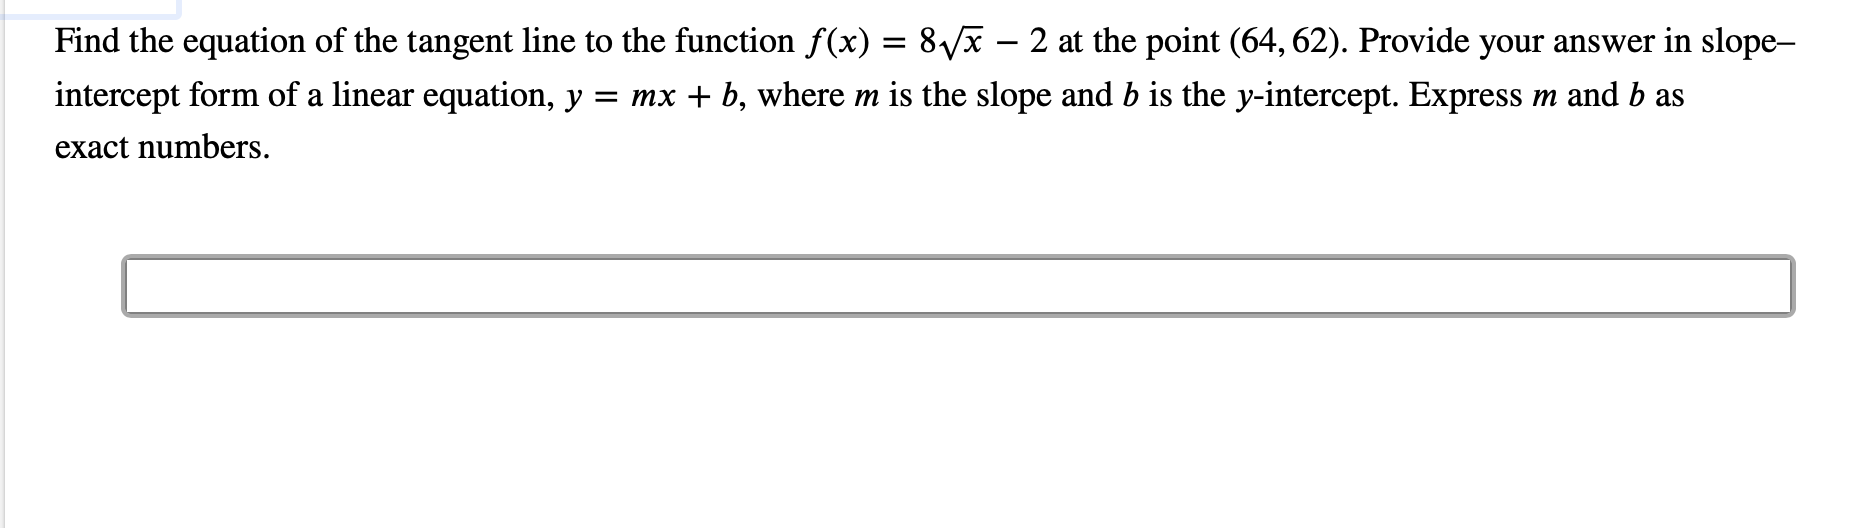 Find the equation of the tangent line to the function f(x) = 8/x - 2 at the point (64, 62). Provide your answer in slope-
intercept form of a linear equation, y
= mx b, where m is the slope and b is the y-intercept. Express
m and b as
exact numbers
